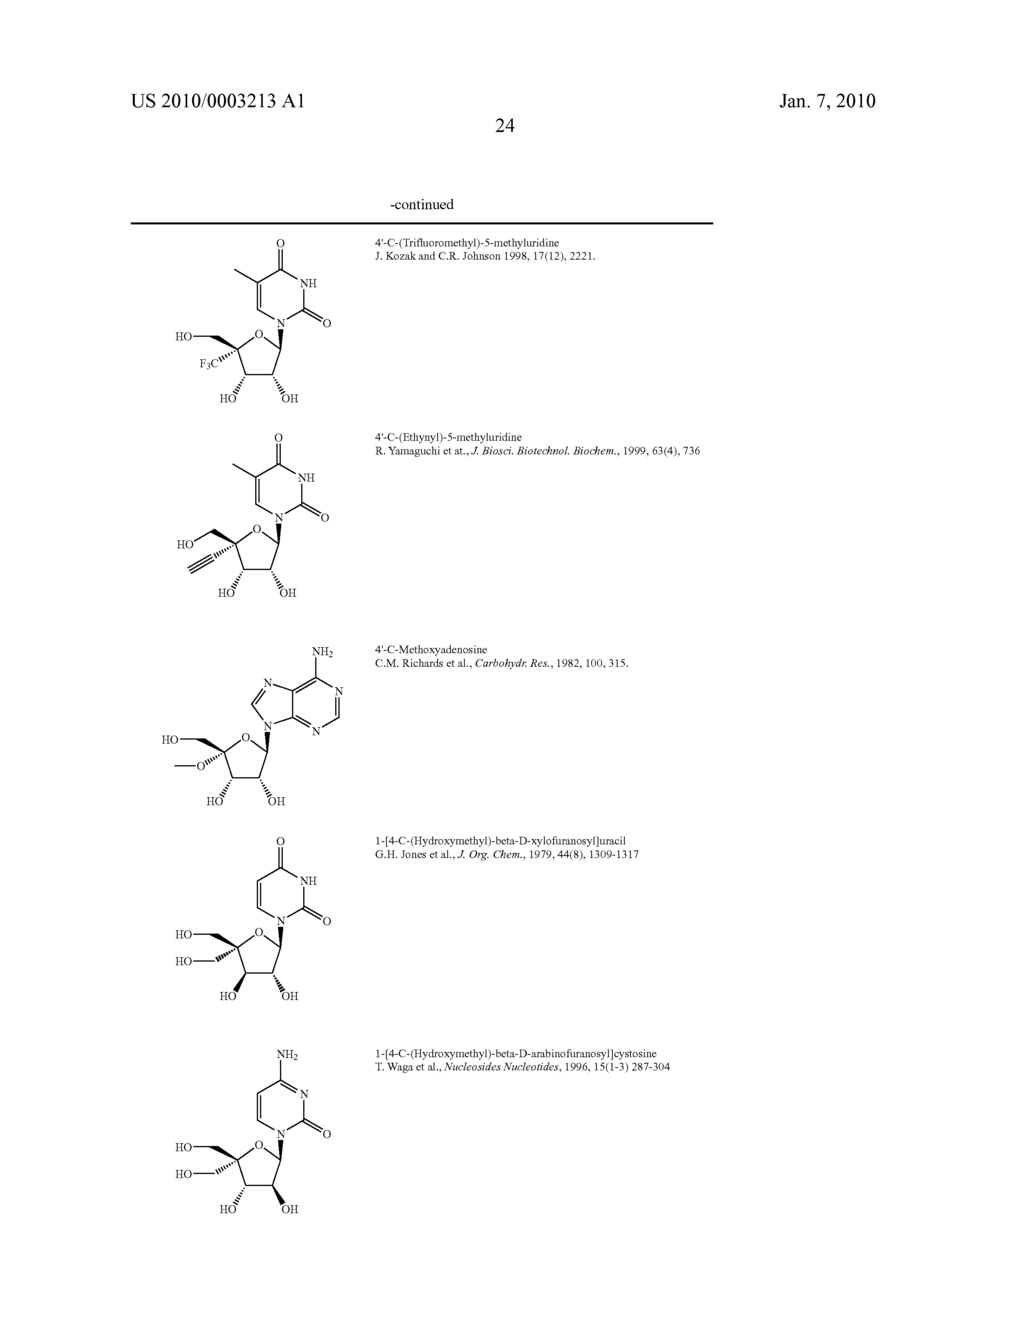 4'-SUBSTITUTED NUCLEOSIDE DERIVATIVES AS INHIBITORS OF HCV RNA REPLICATION - diagram, schematic, and image 25